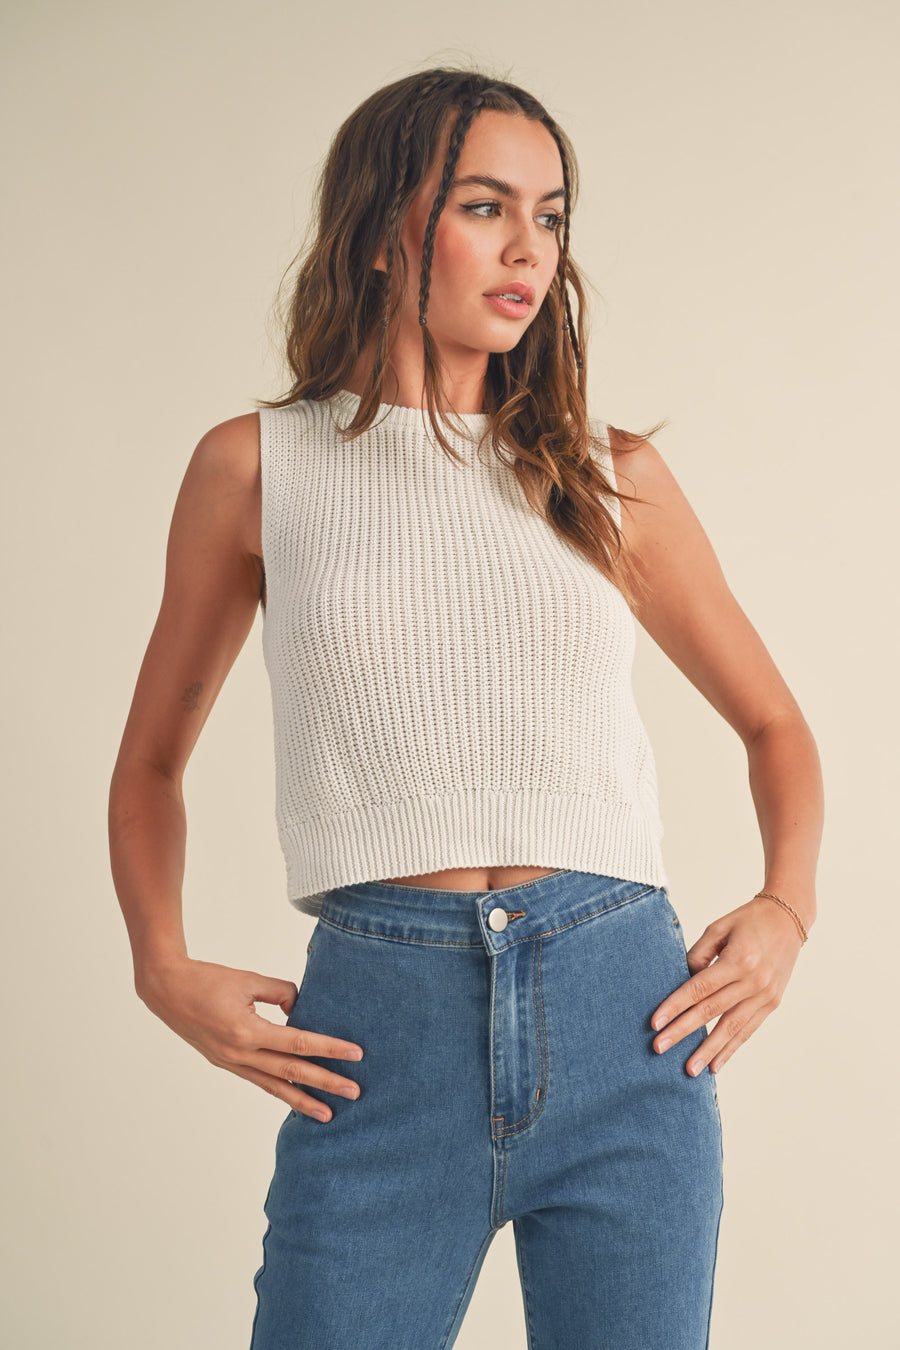 Featuring a cropped knitted sleevless top with a twisted back in the color off white 